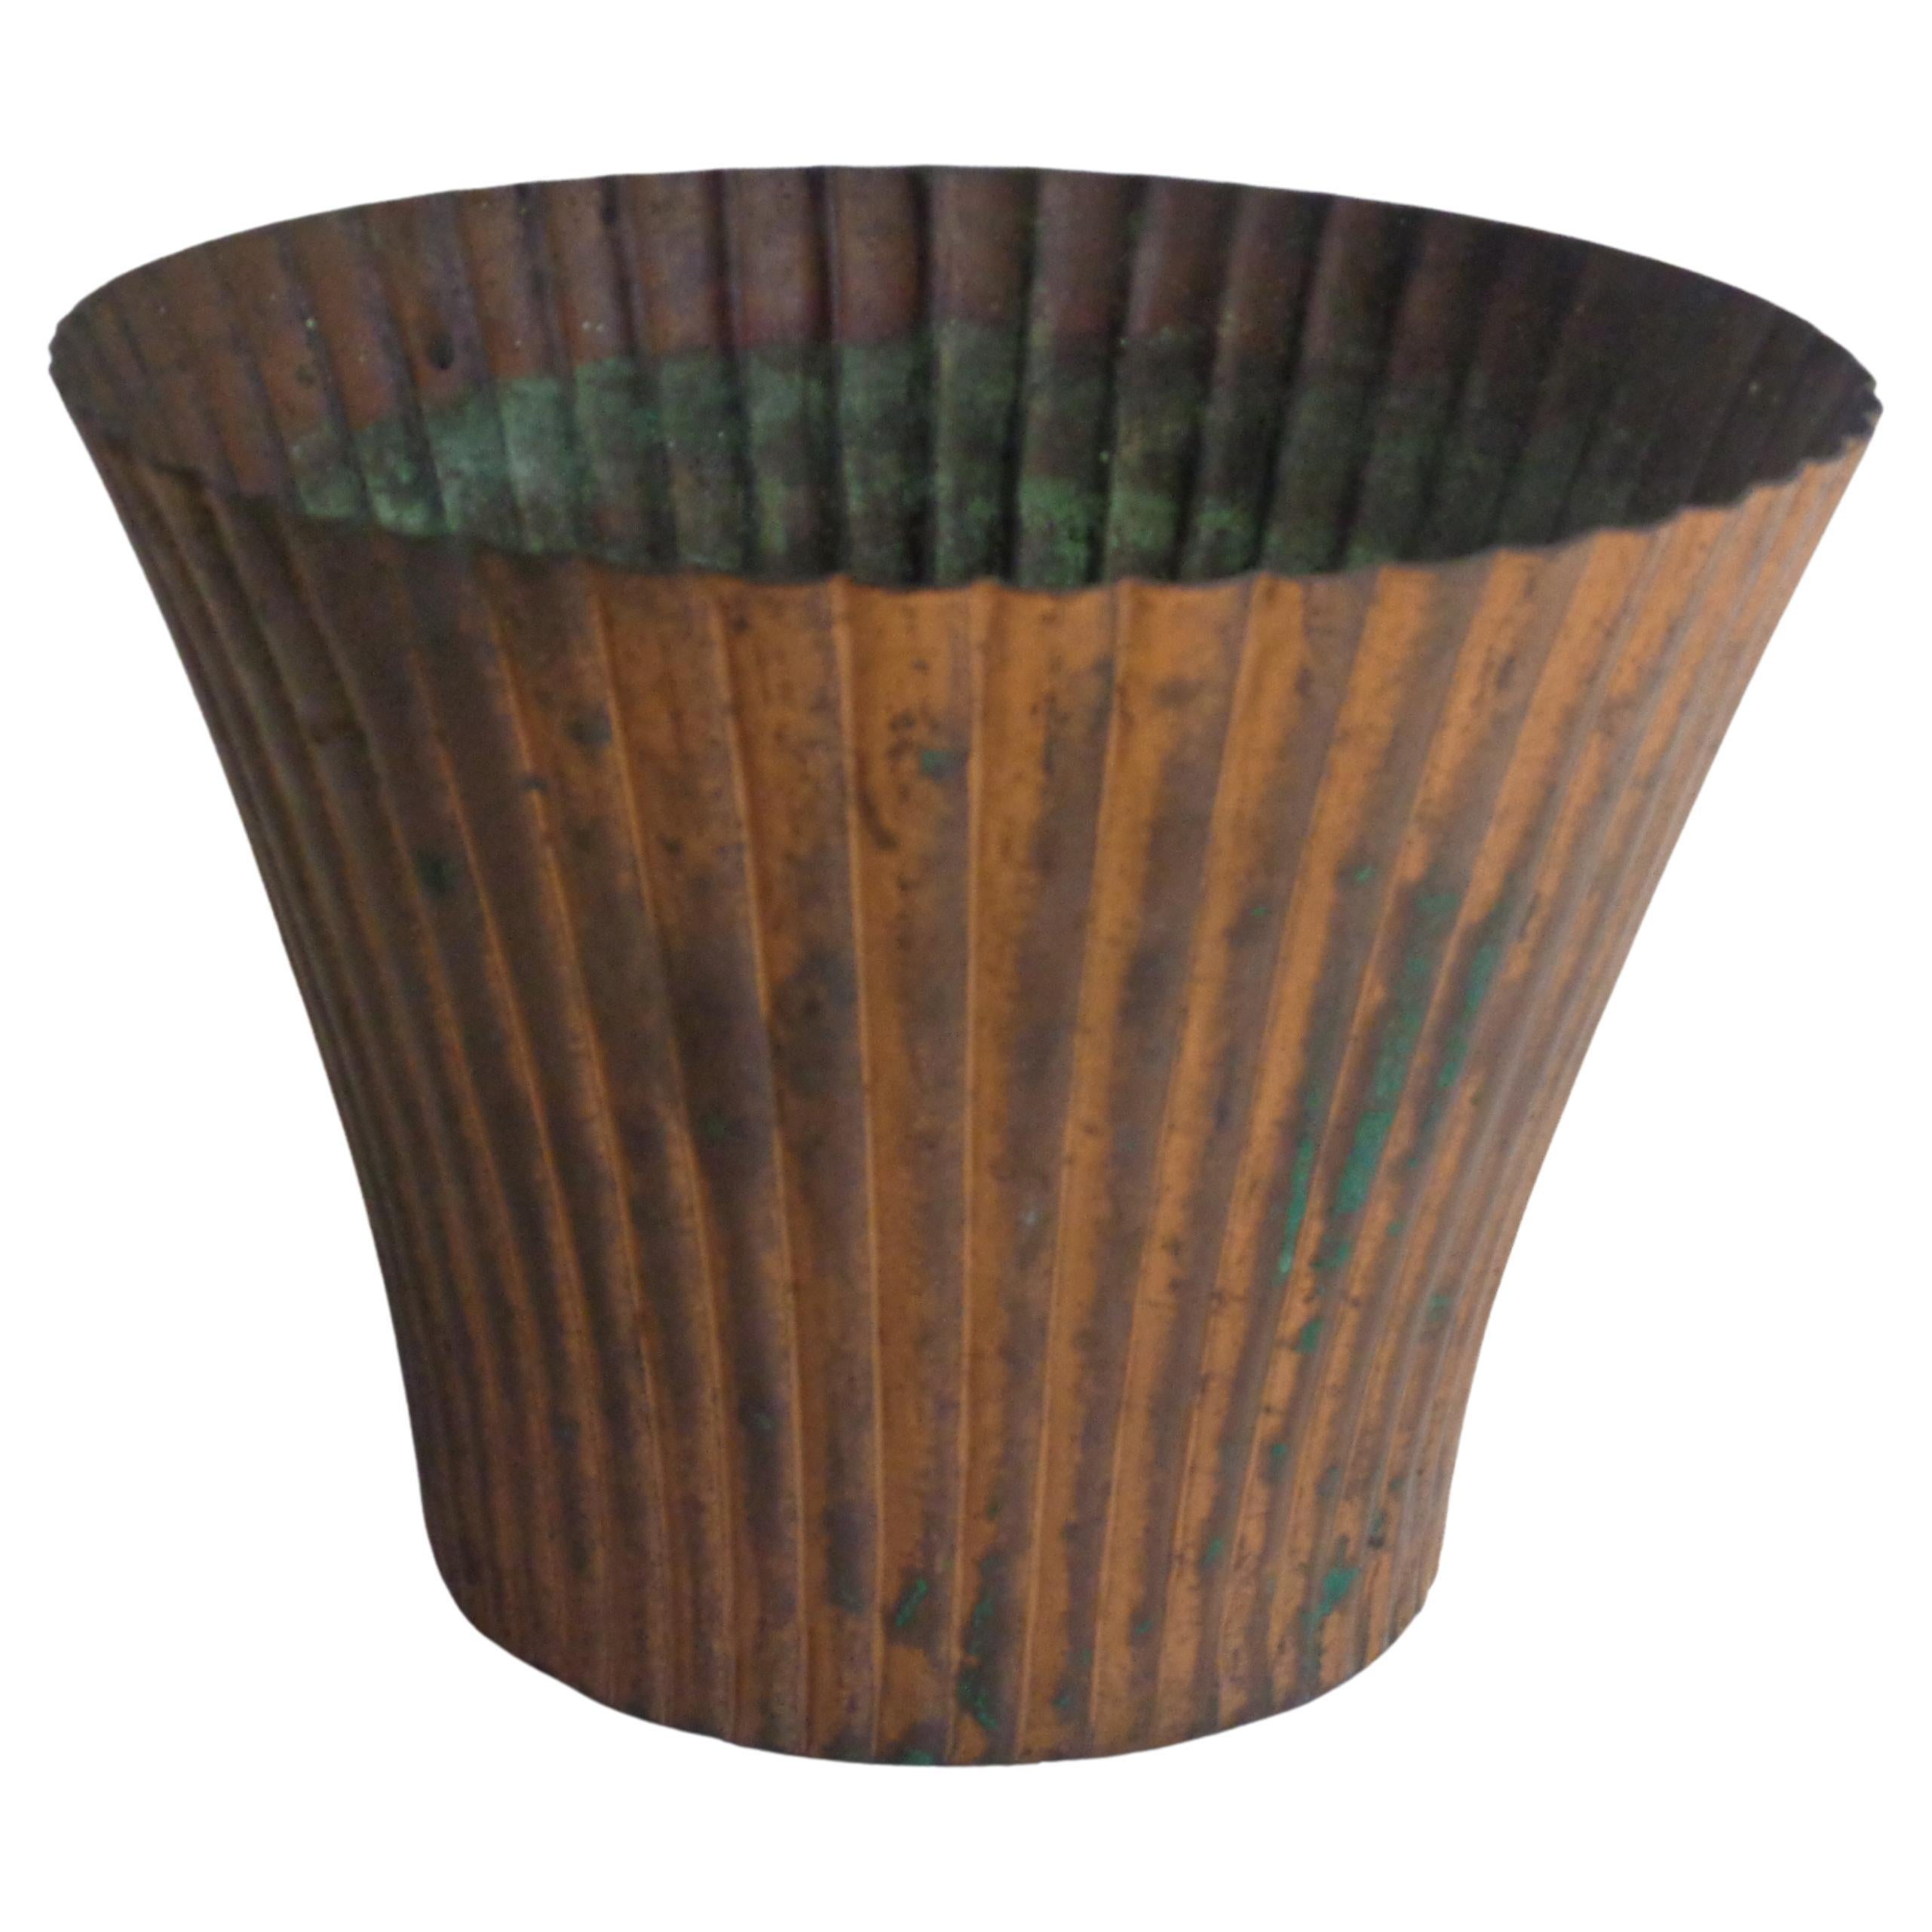 Fluted Copper Vase - Chase Brass and Copper Company, 1930's